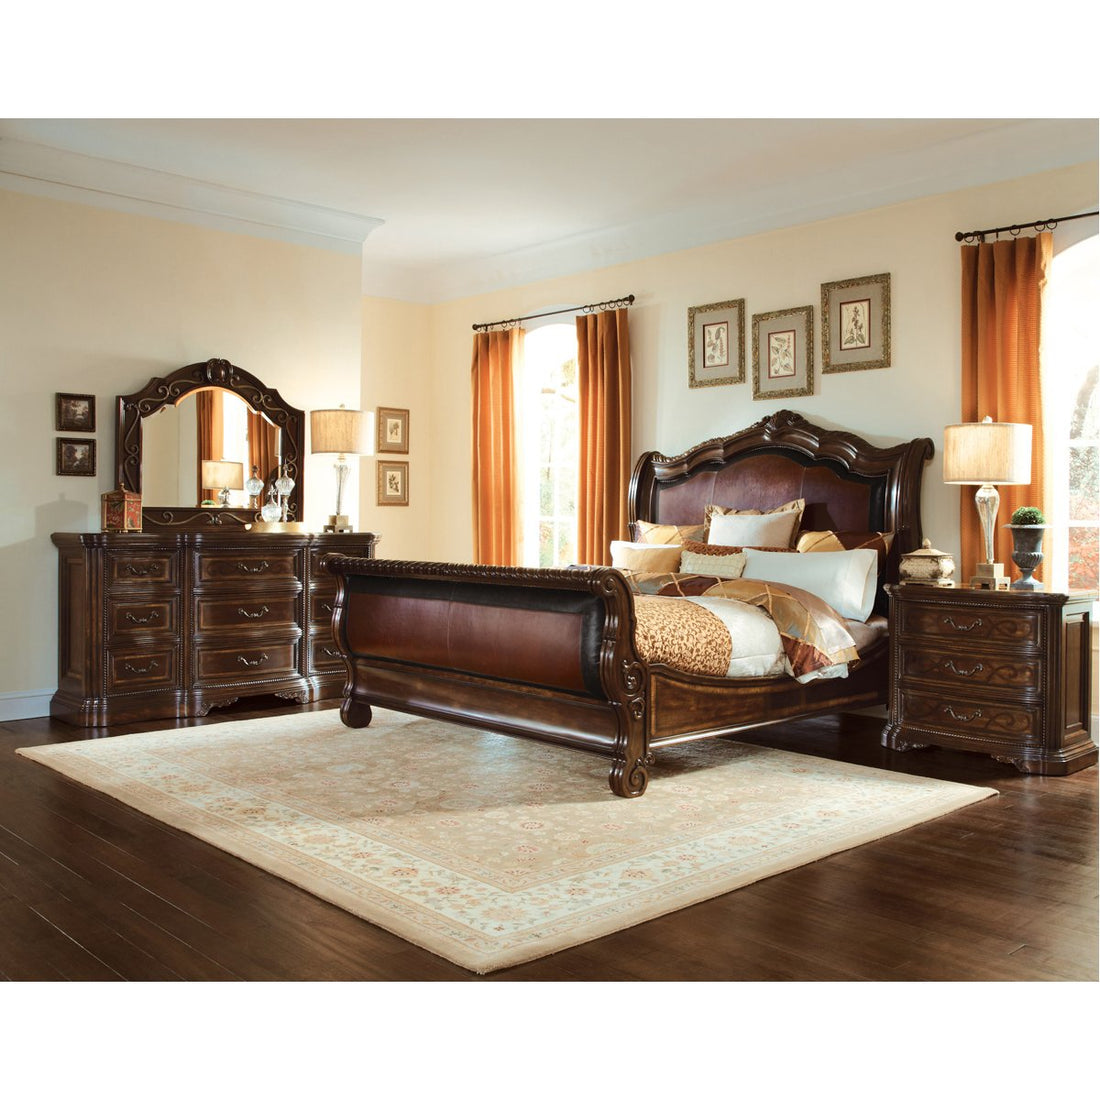 A.R.T. Furniture Valencia Upholstered Sleigh Bed